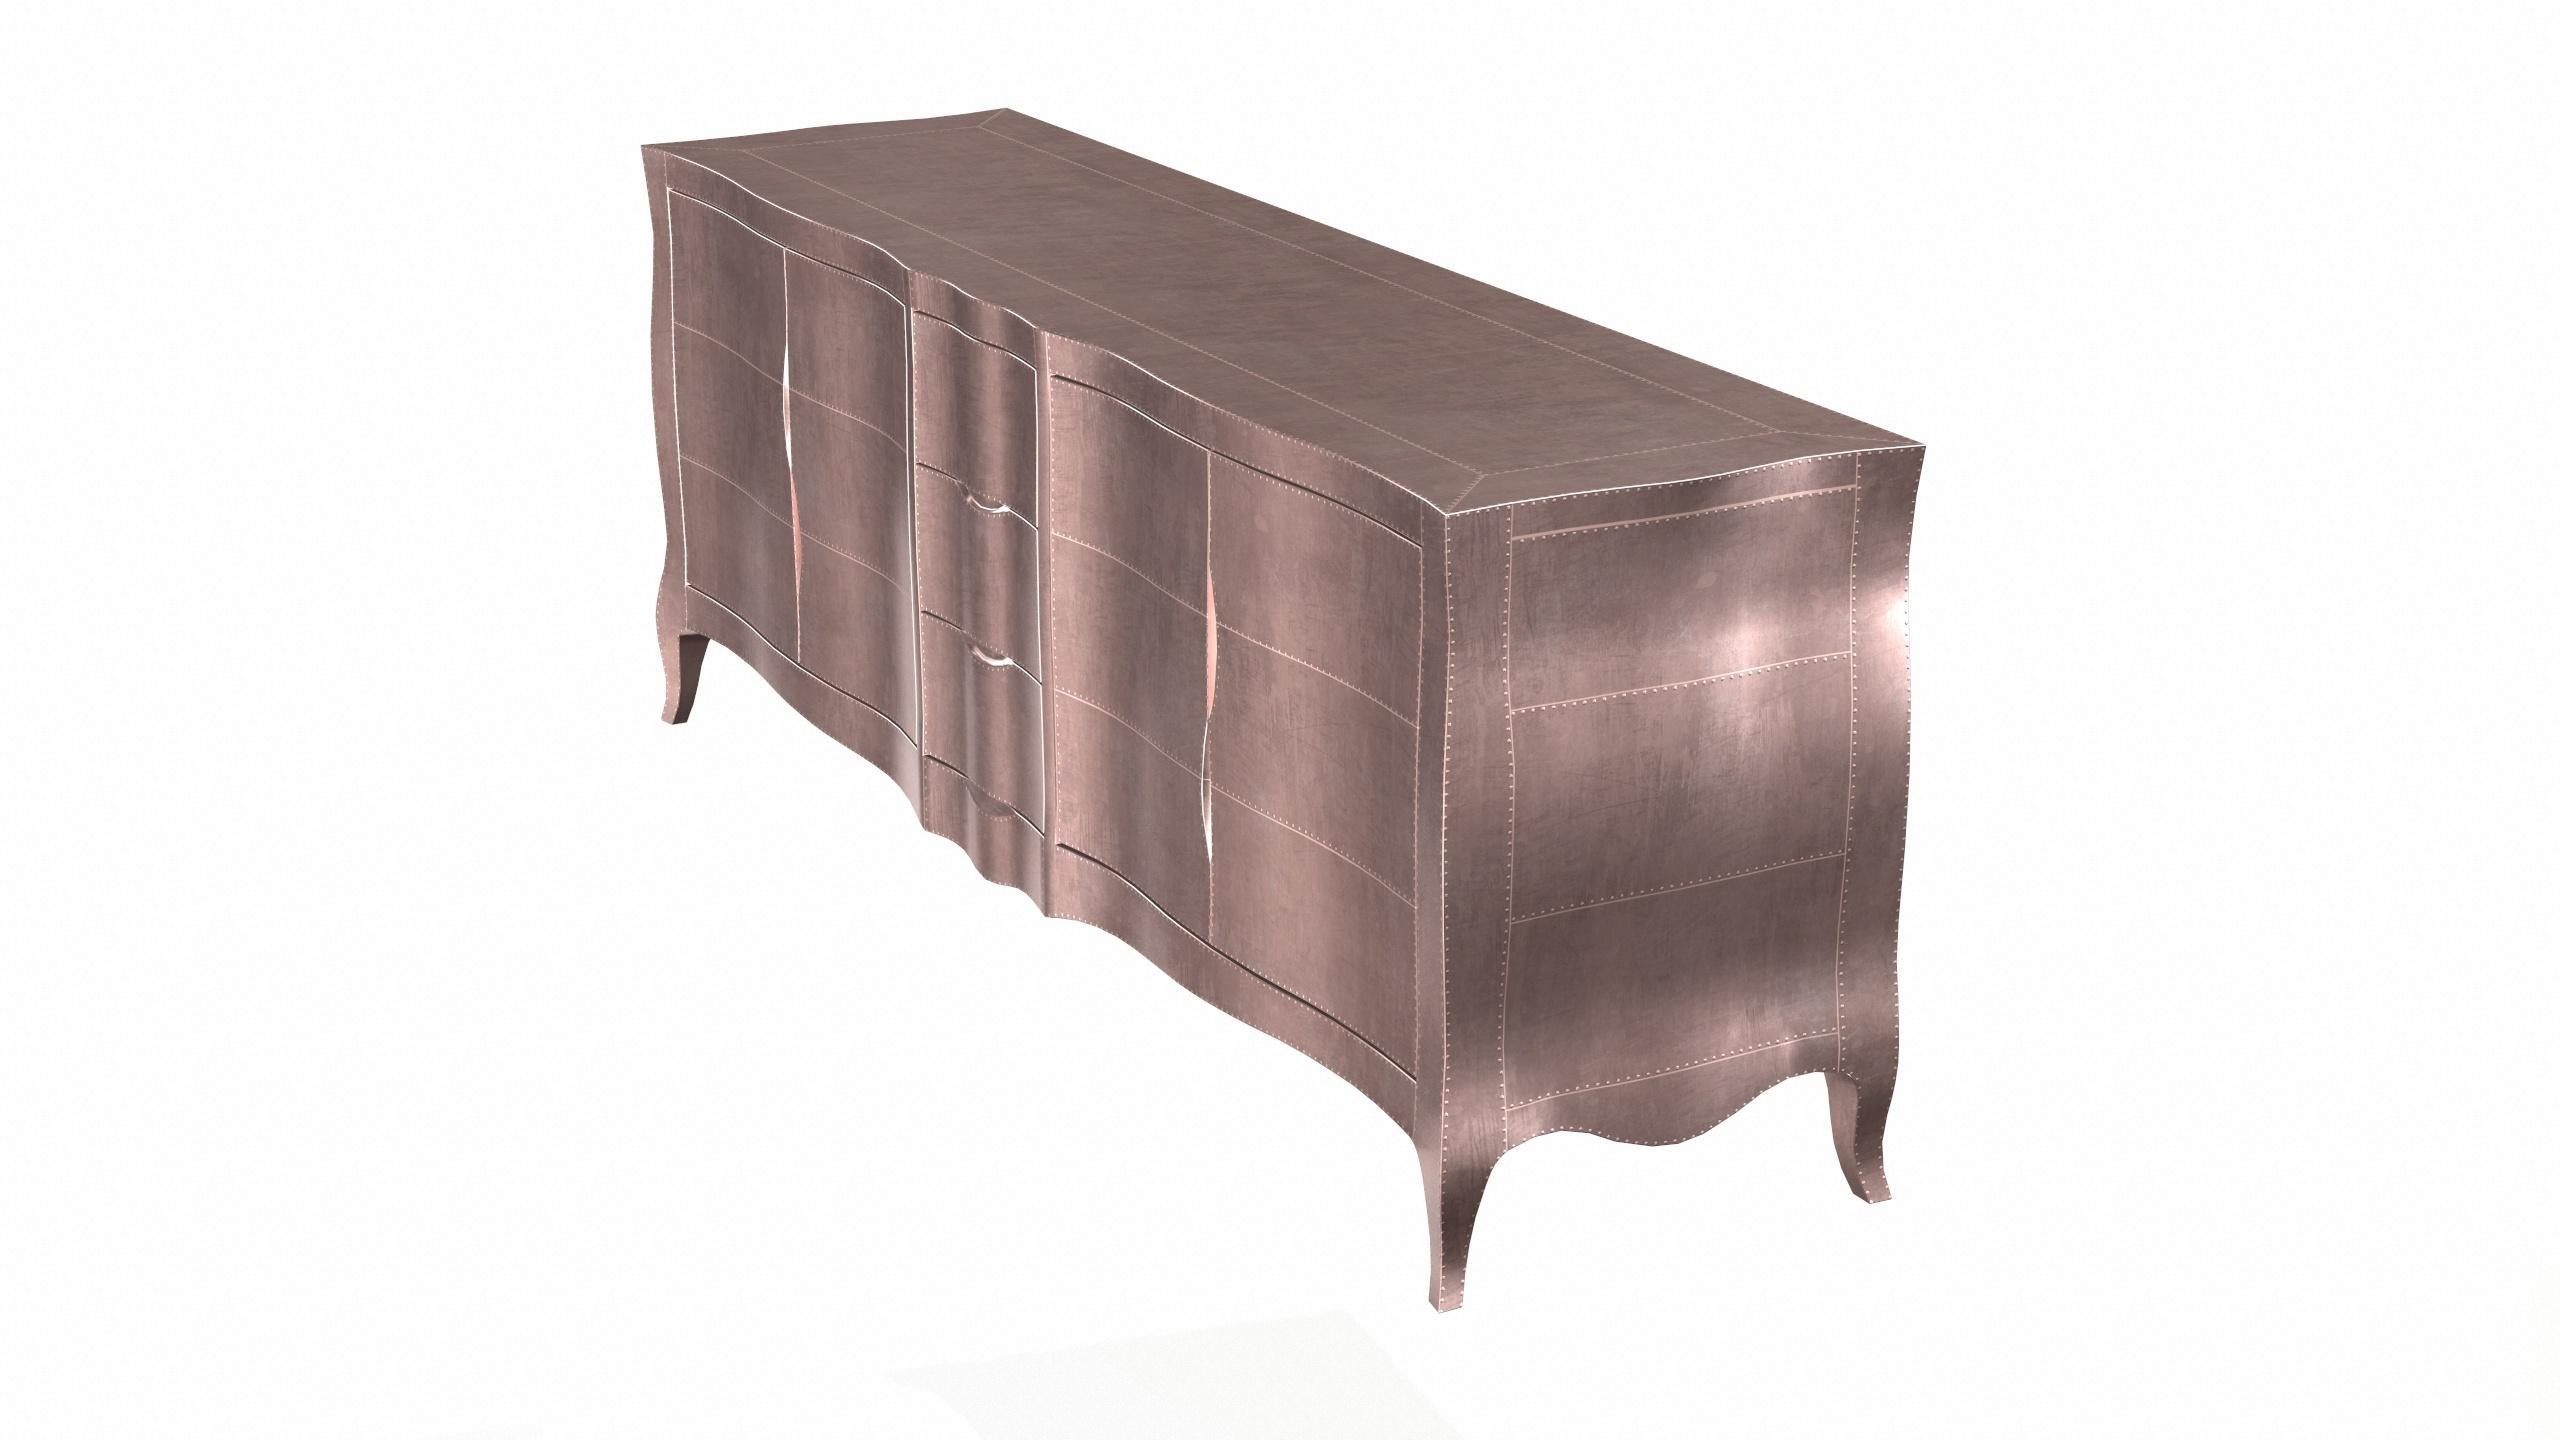 Hand-Carved Louise Credenza Art Deco Cupboards in Smooth Copper by Paul Mathieu  For Sale